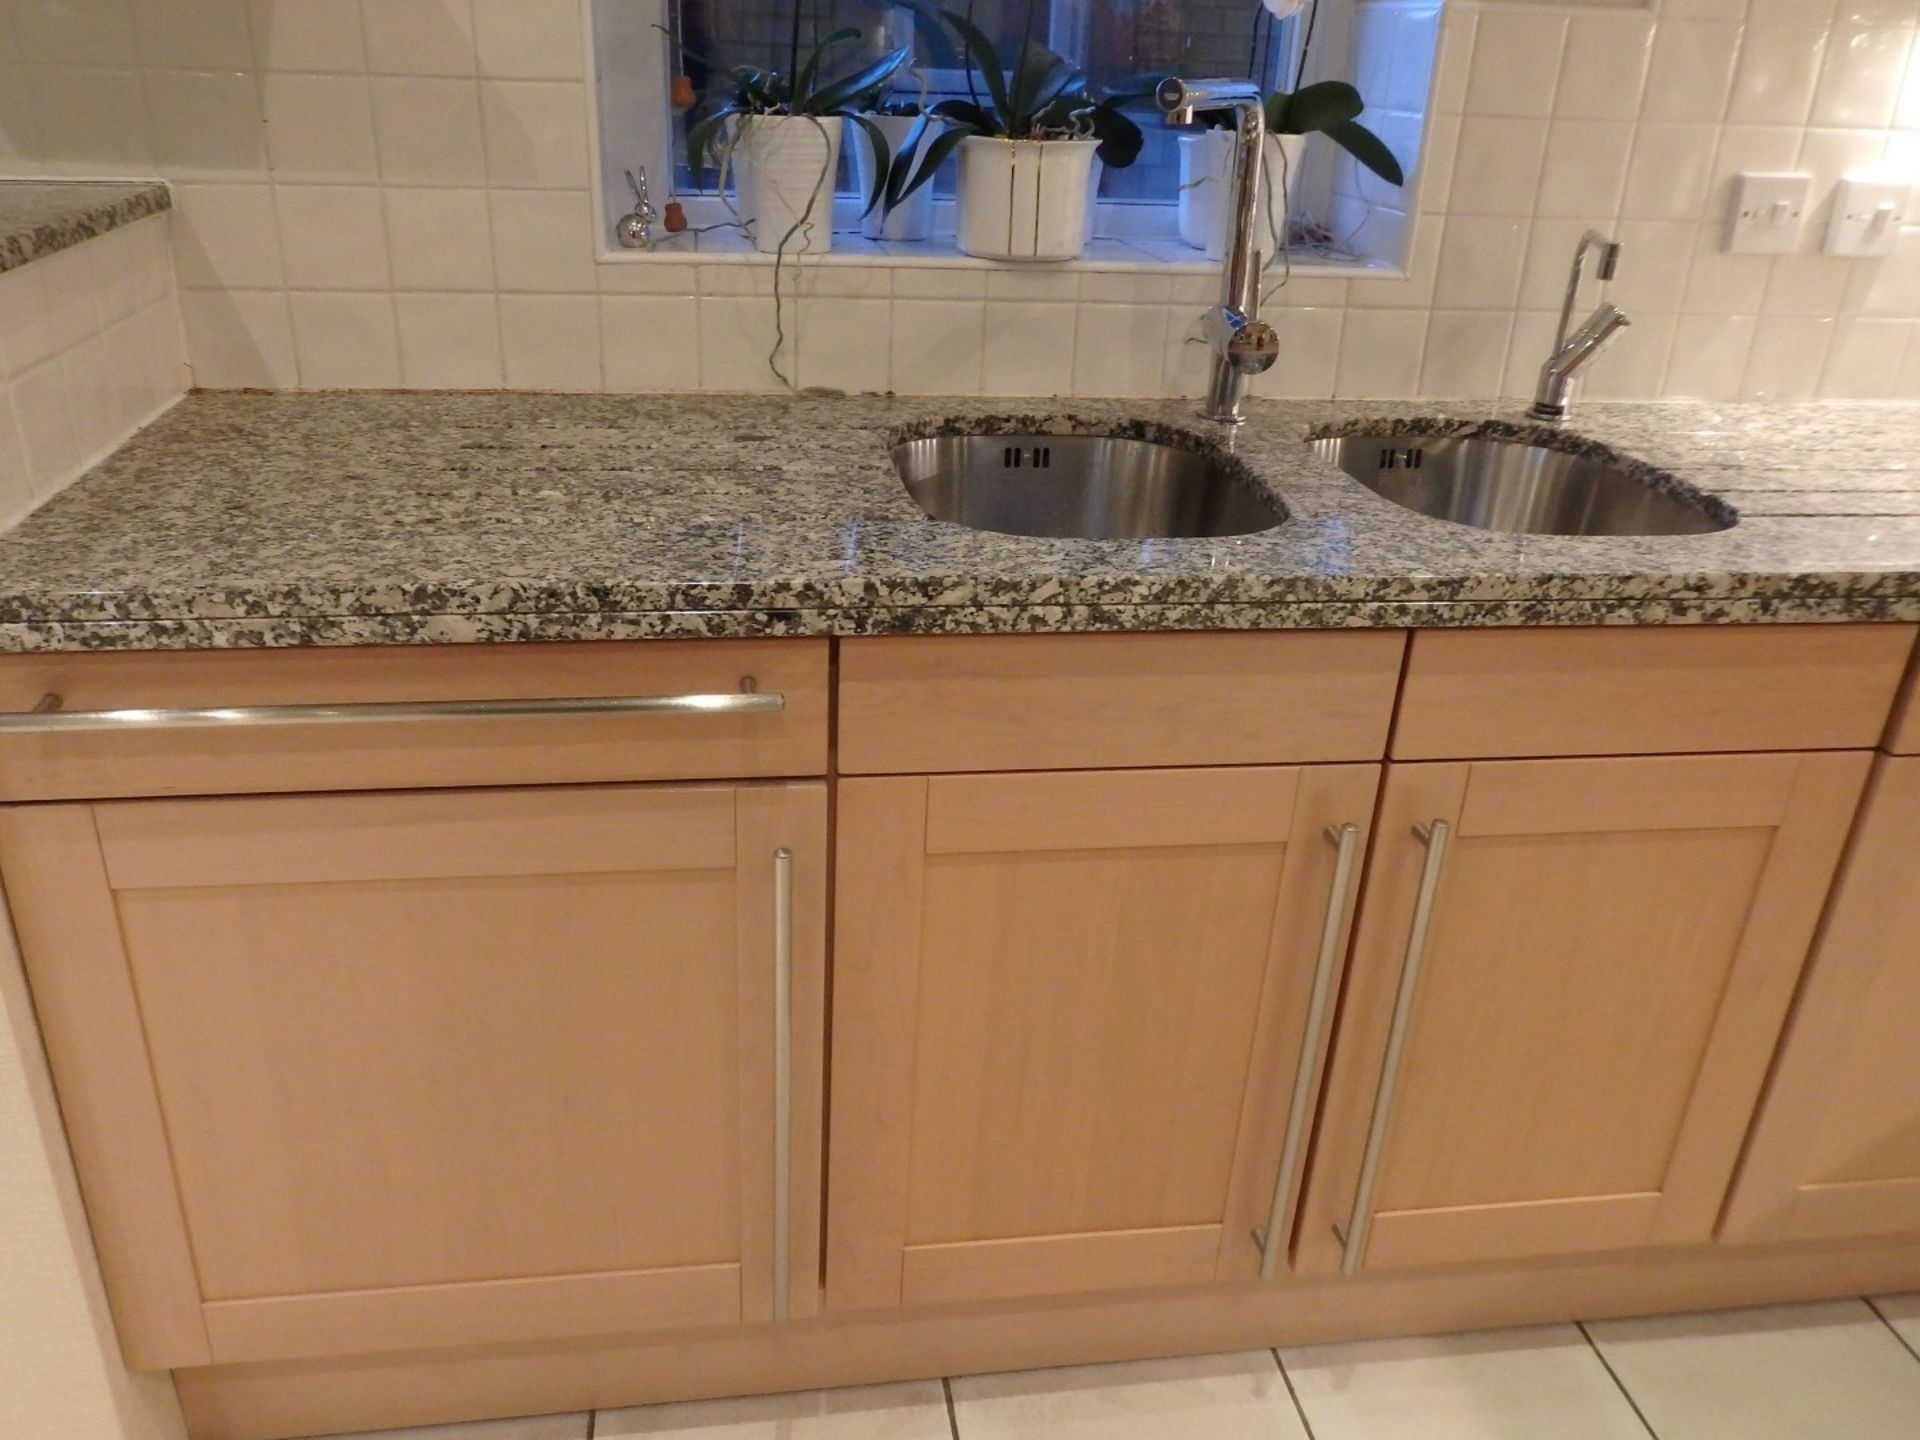 1 x Siematic Fitted Kitchen With Beech Shaker Style Doors, Granite Worktops, Central Island and - Image 6 of 151